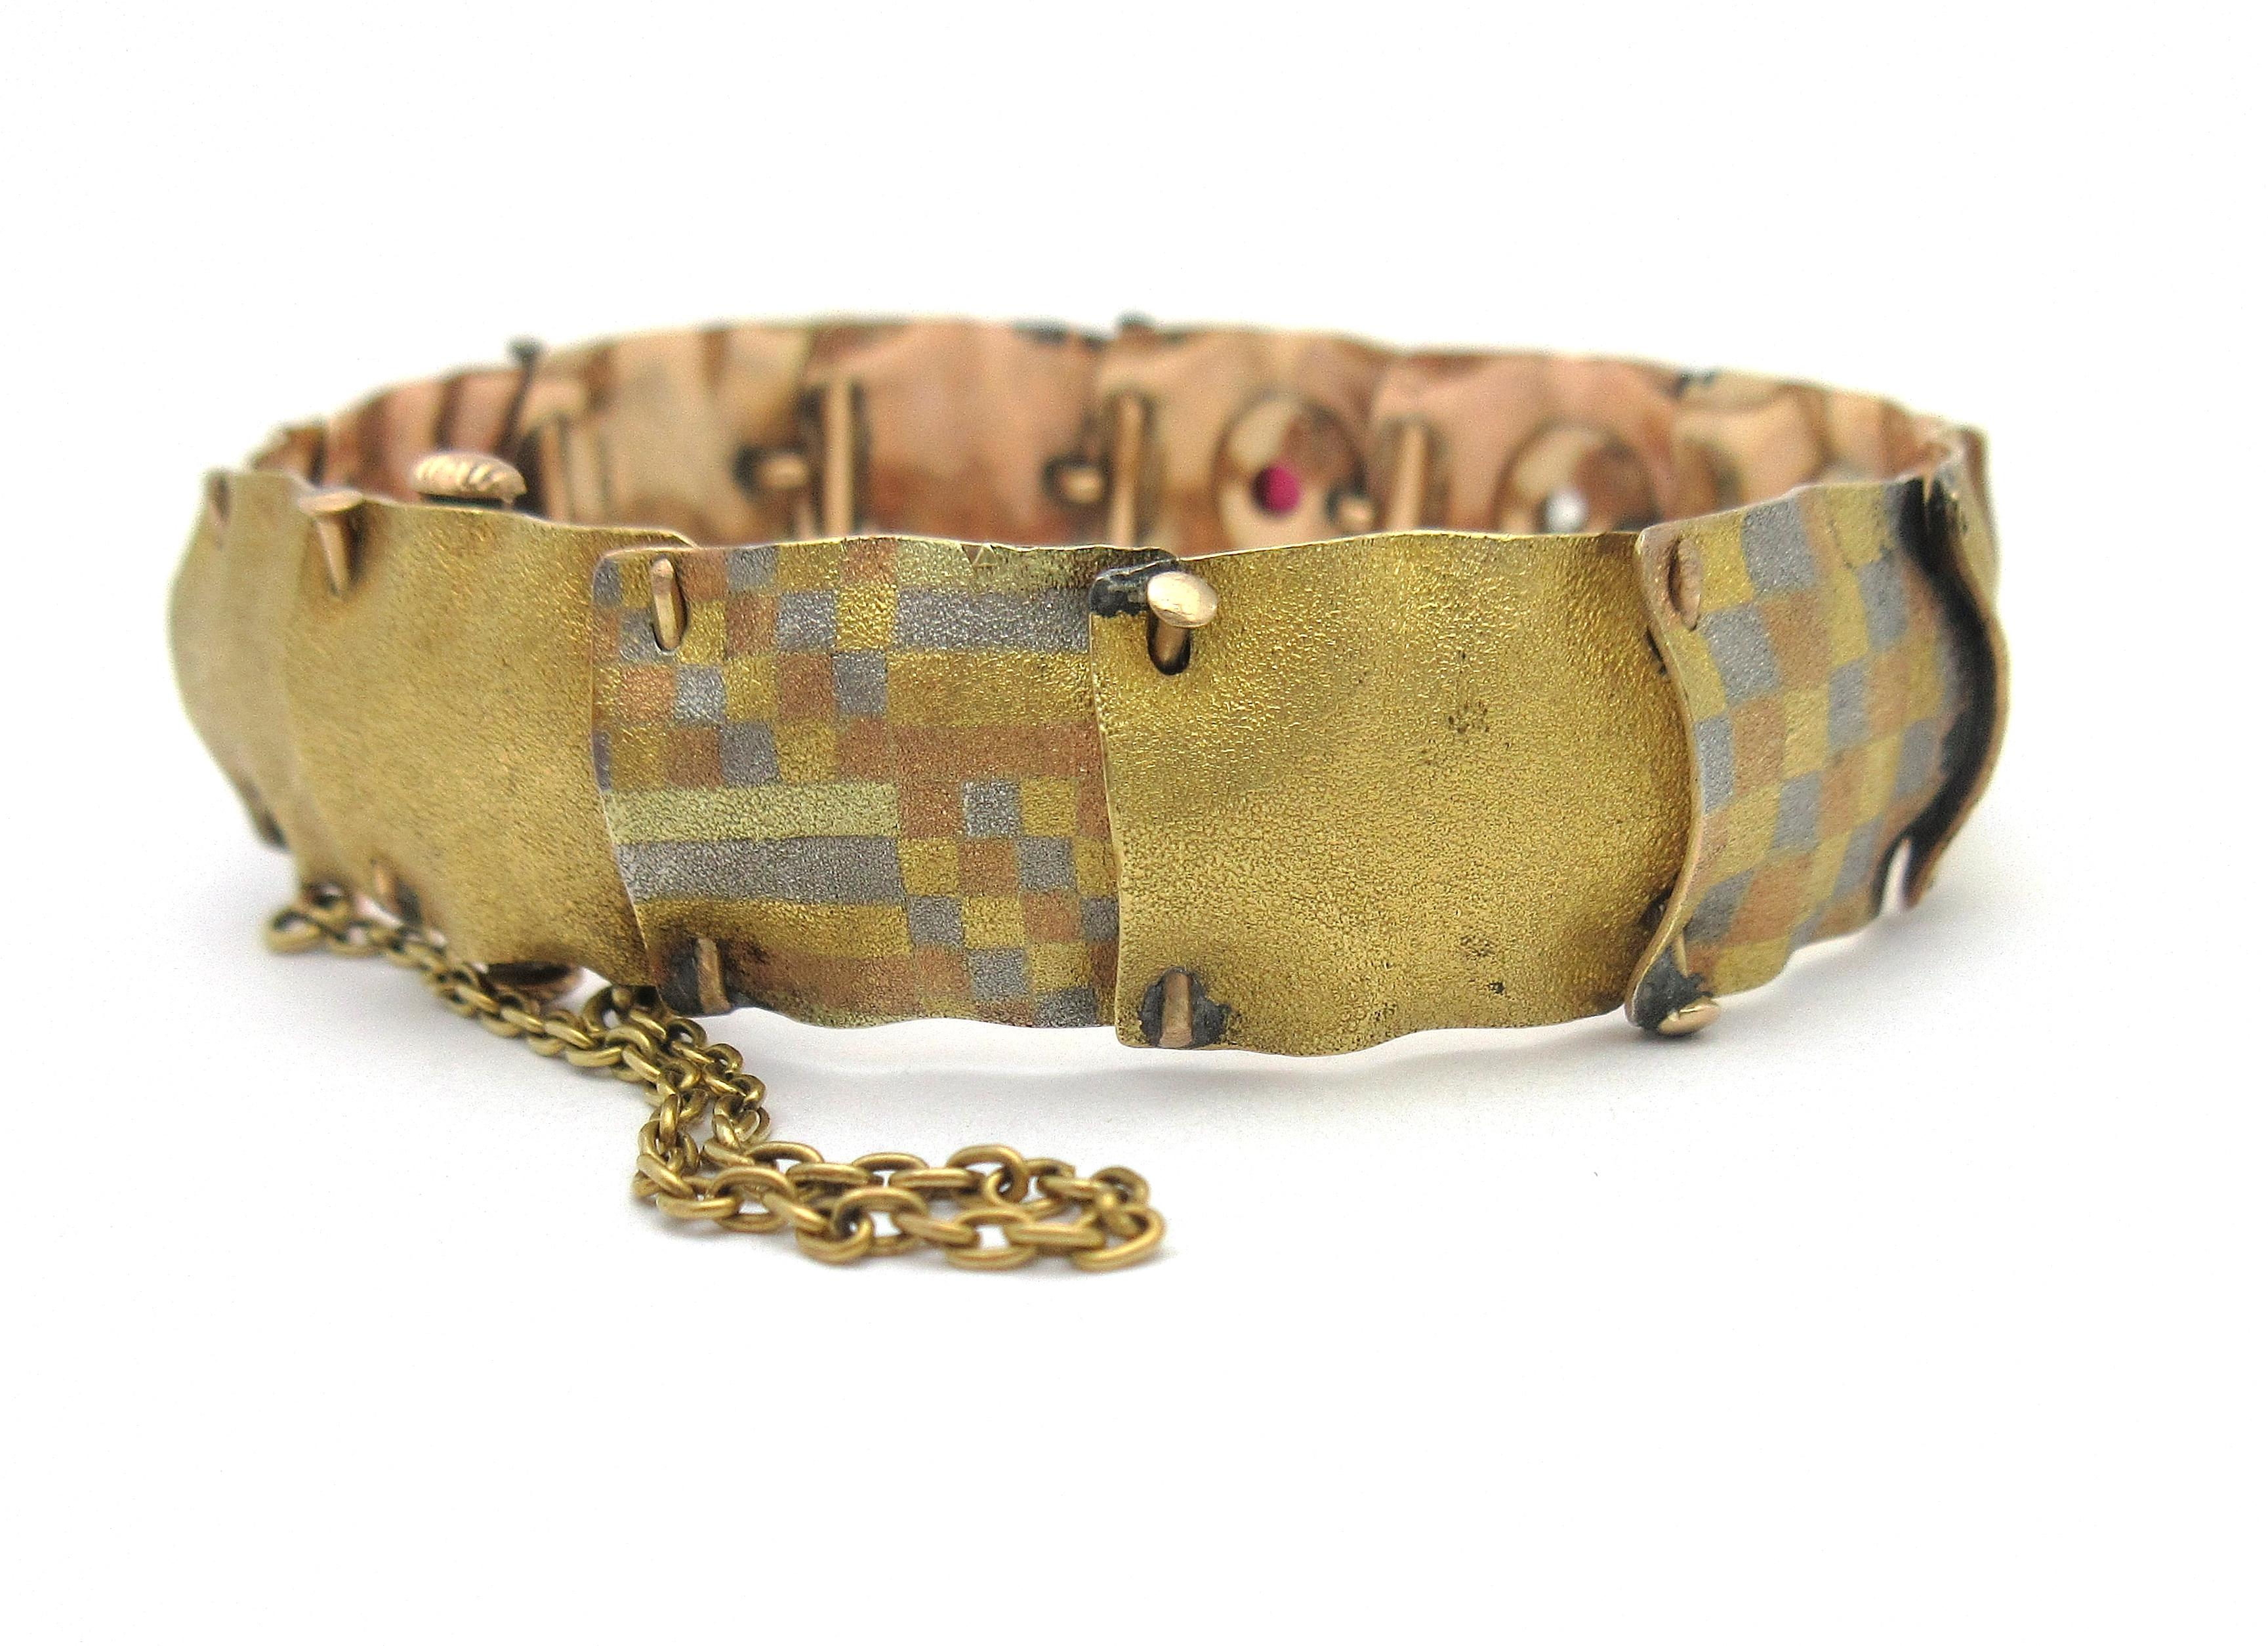 This beautiful antique bracelet by AJ Hedges & Co was made during the late 1800s.  The piece consists of flexible links resembling pinned fabric swatches with an overall bloomed texture.  Every other link incorporates tricolor 14 karat gold and